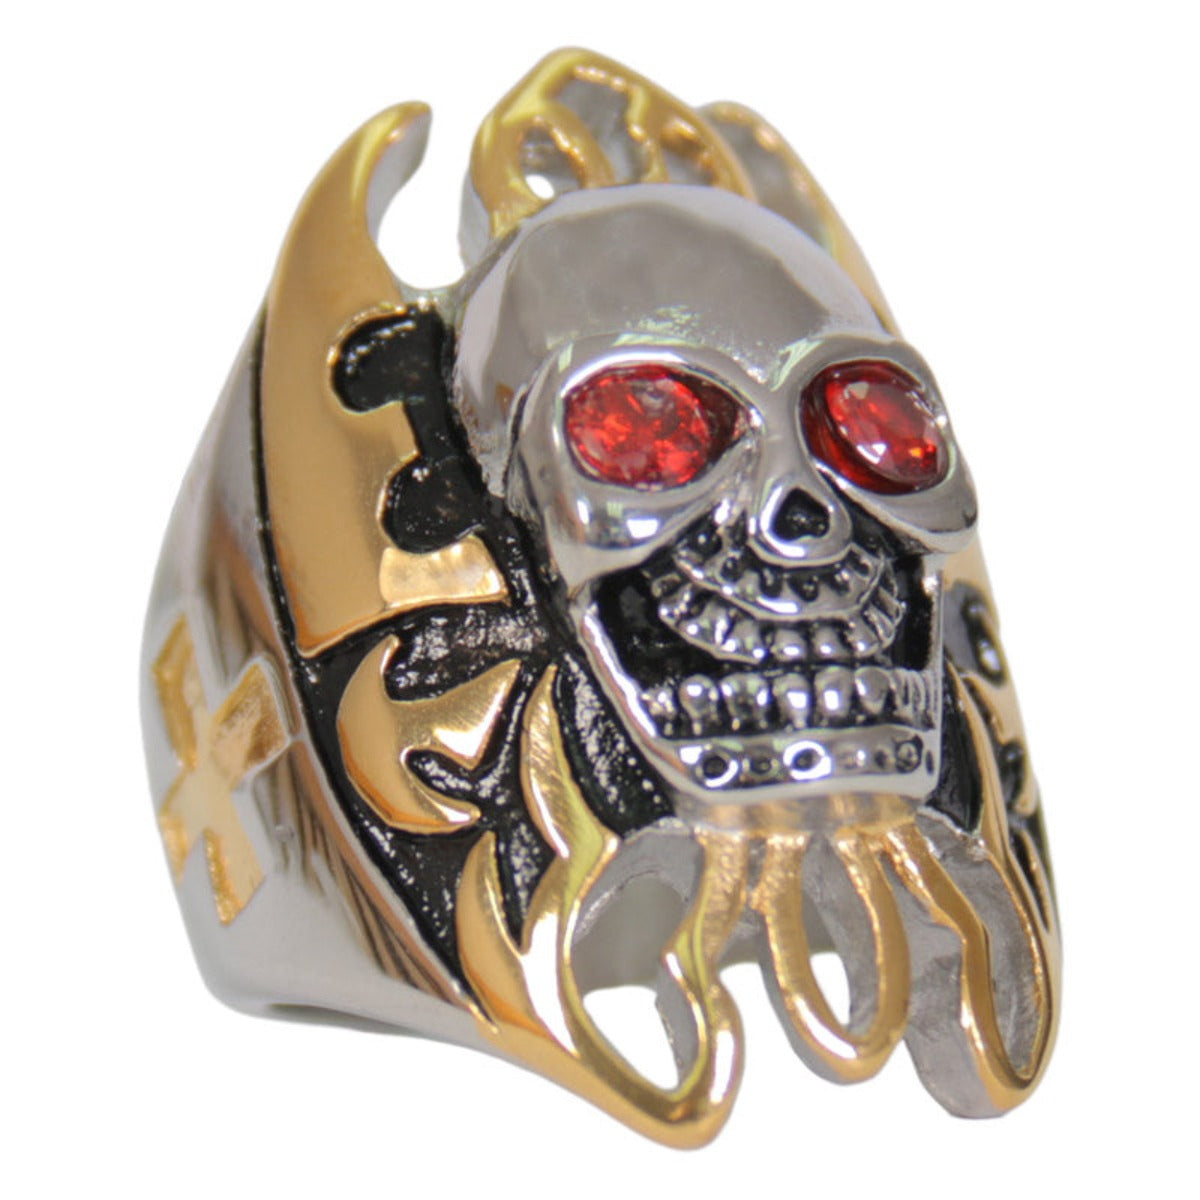 Hot Leathers Men's Silver Skull And Gold Tone Flames Stainless Steel Biker Ring